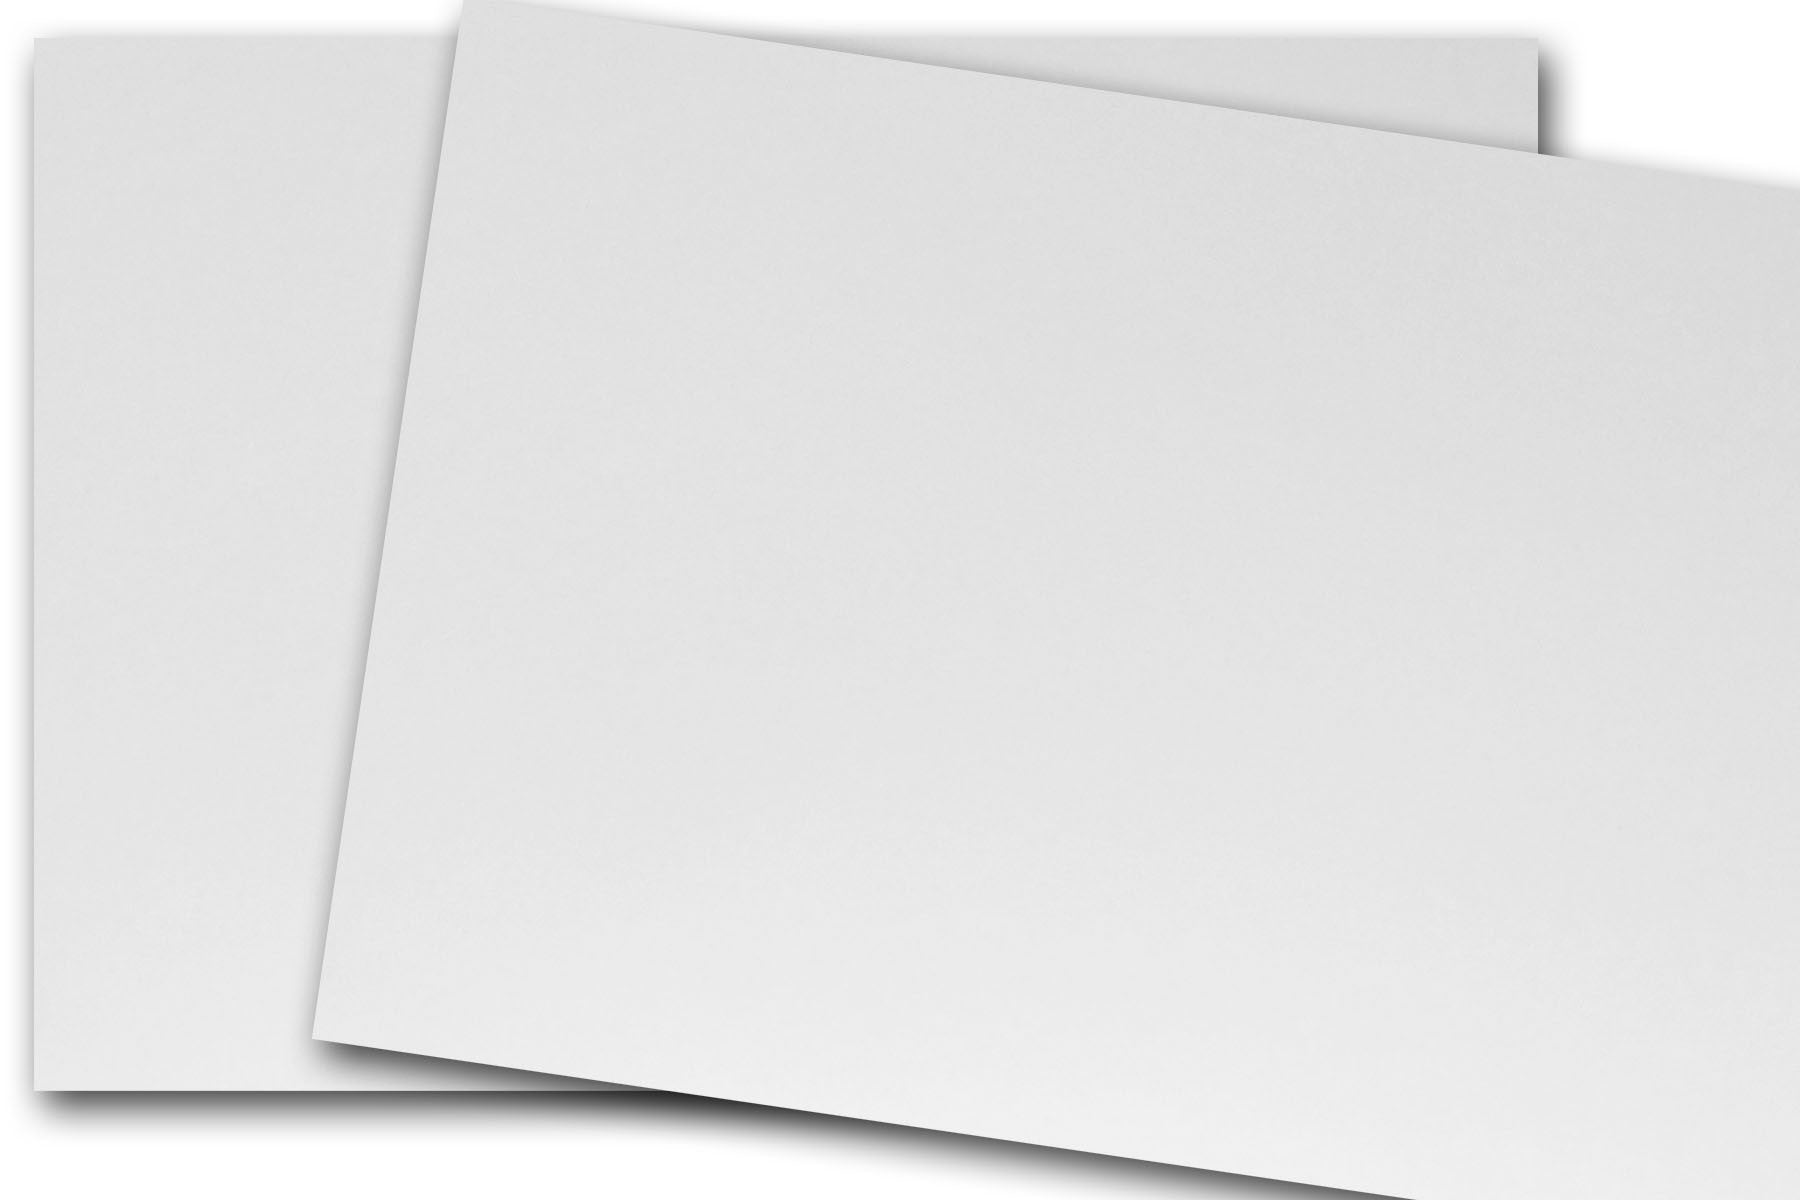 Premium Glossy White 80lb 8.5 x 11 Cardstock - Double Sided